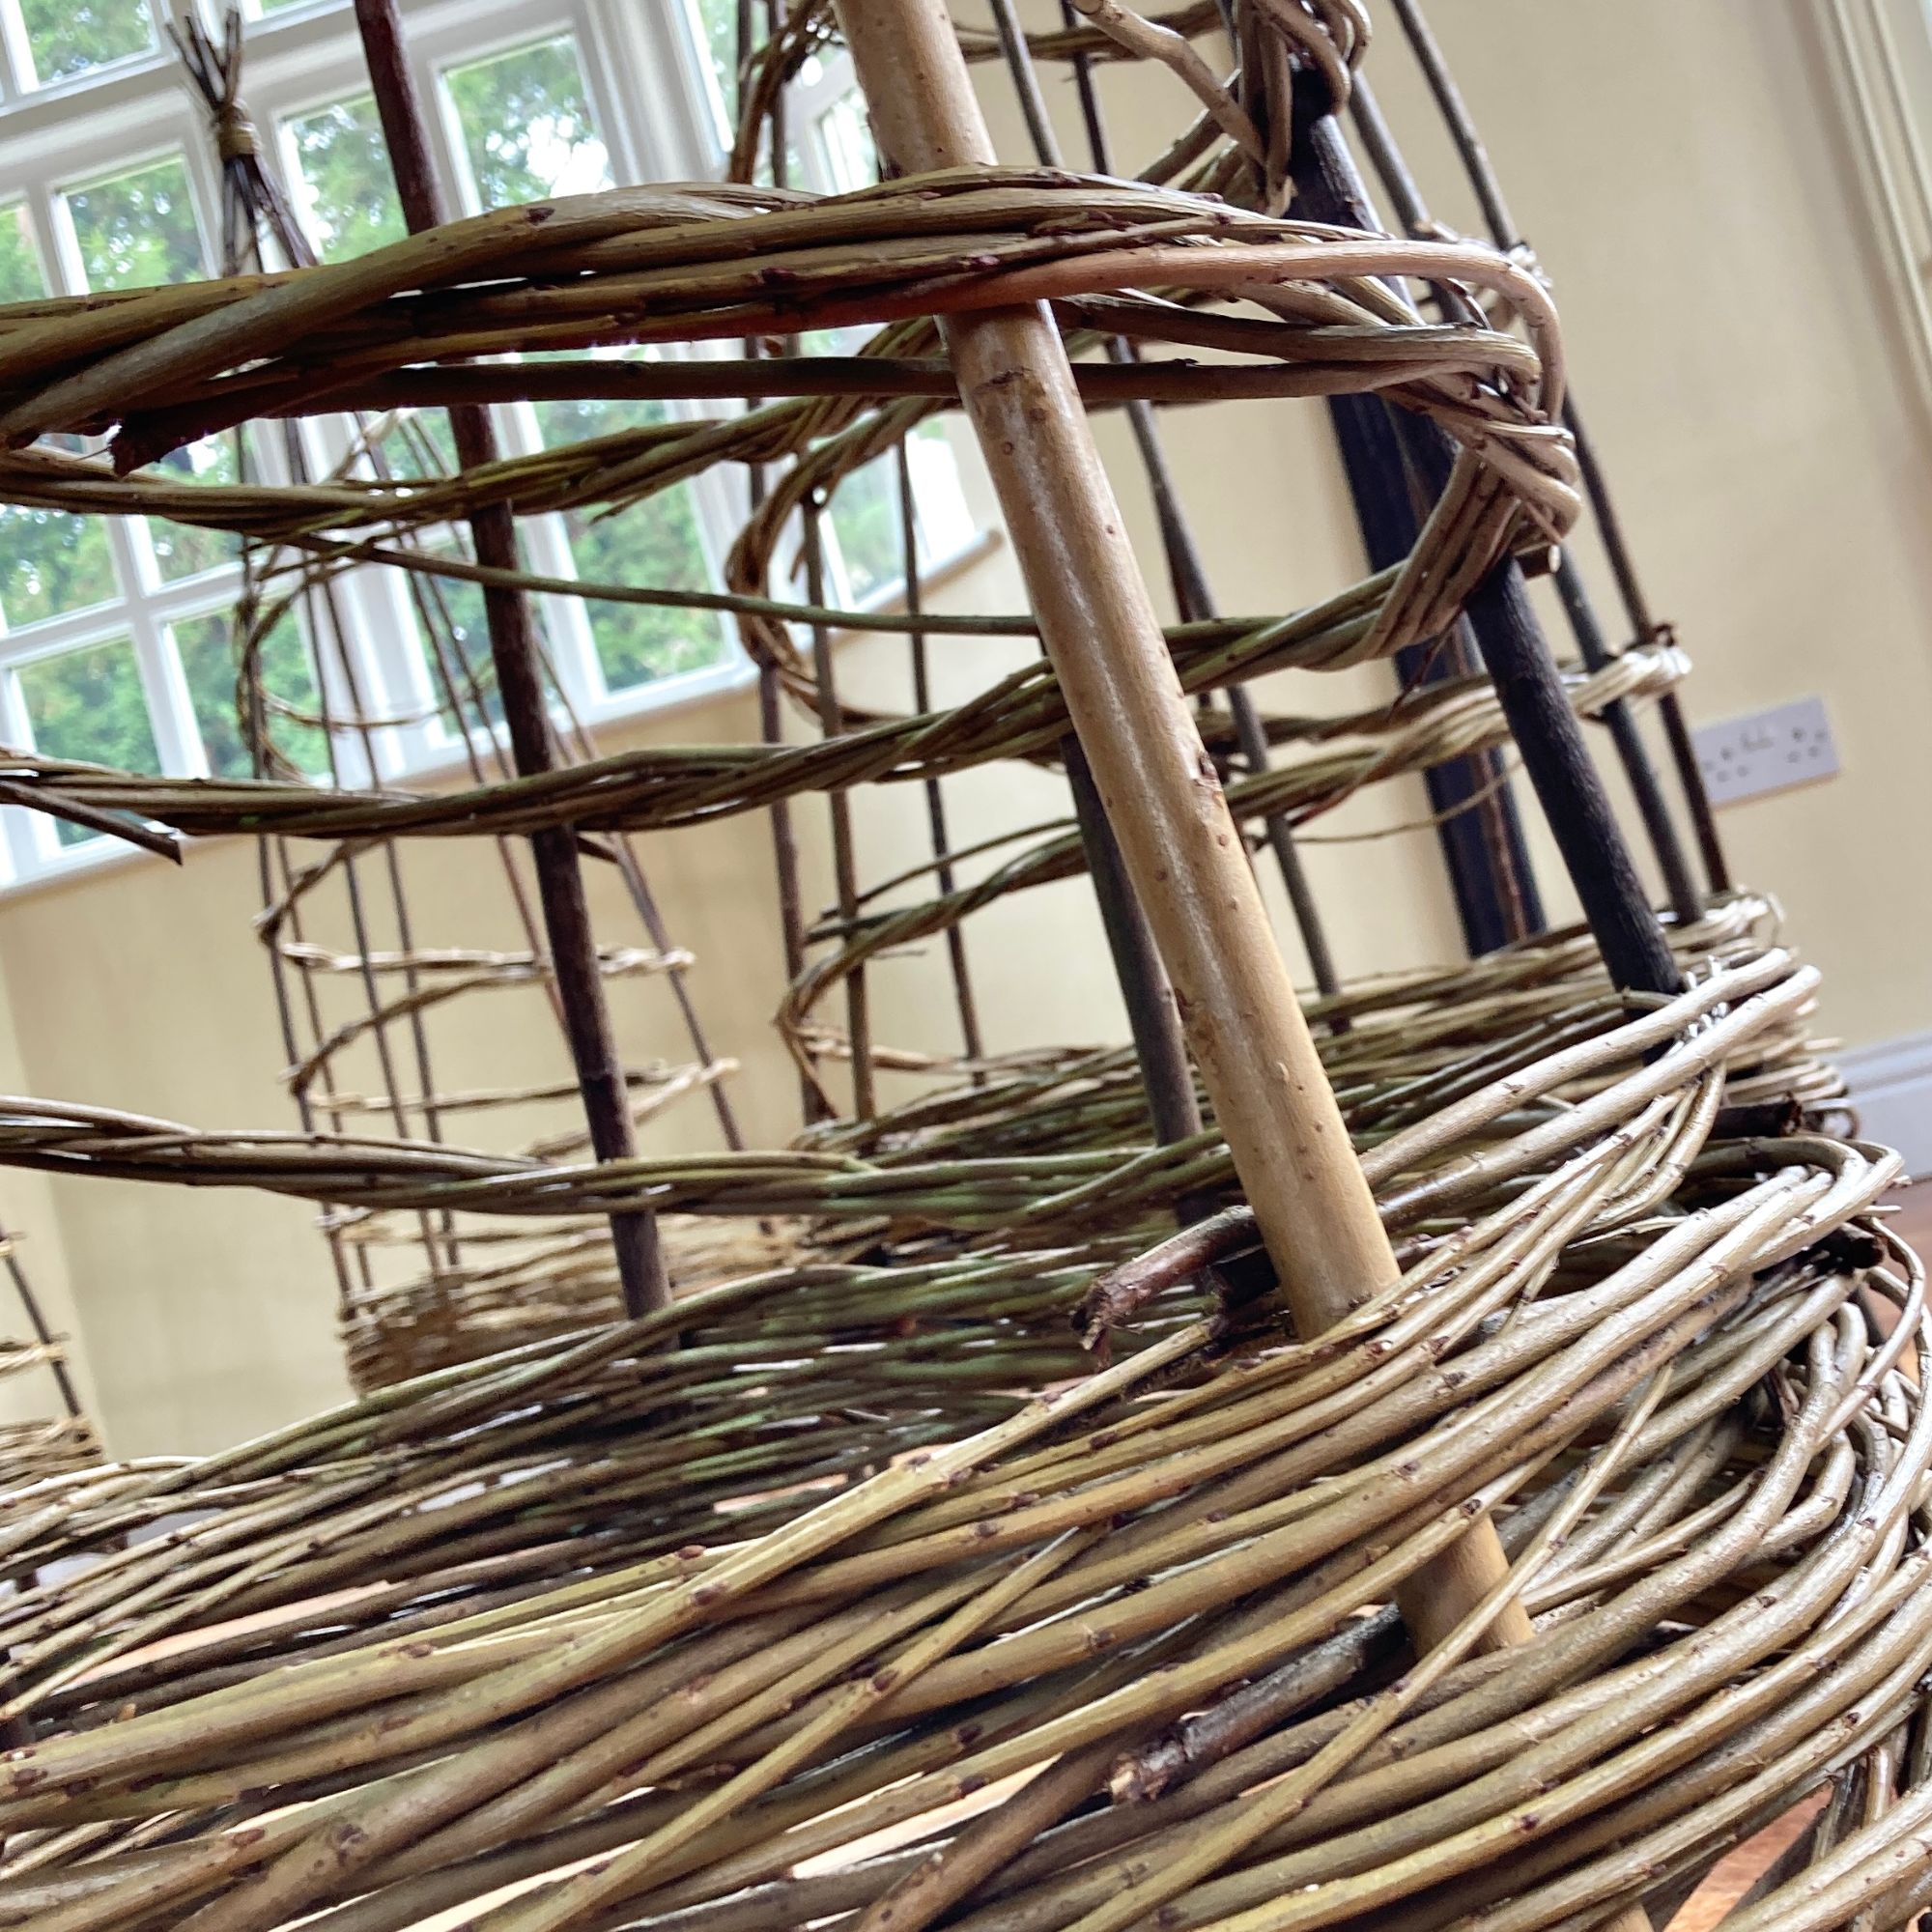 Willow Wigwam and Birdhouse Workshop - Willow Weaving